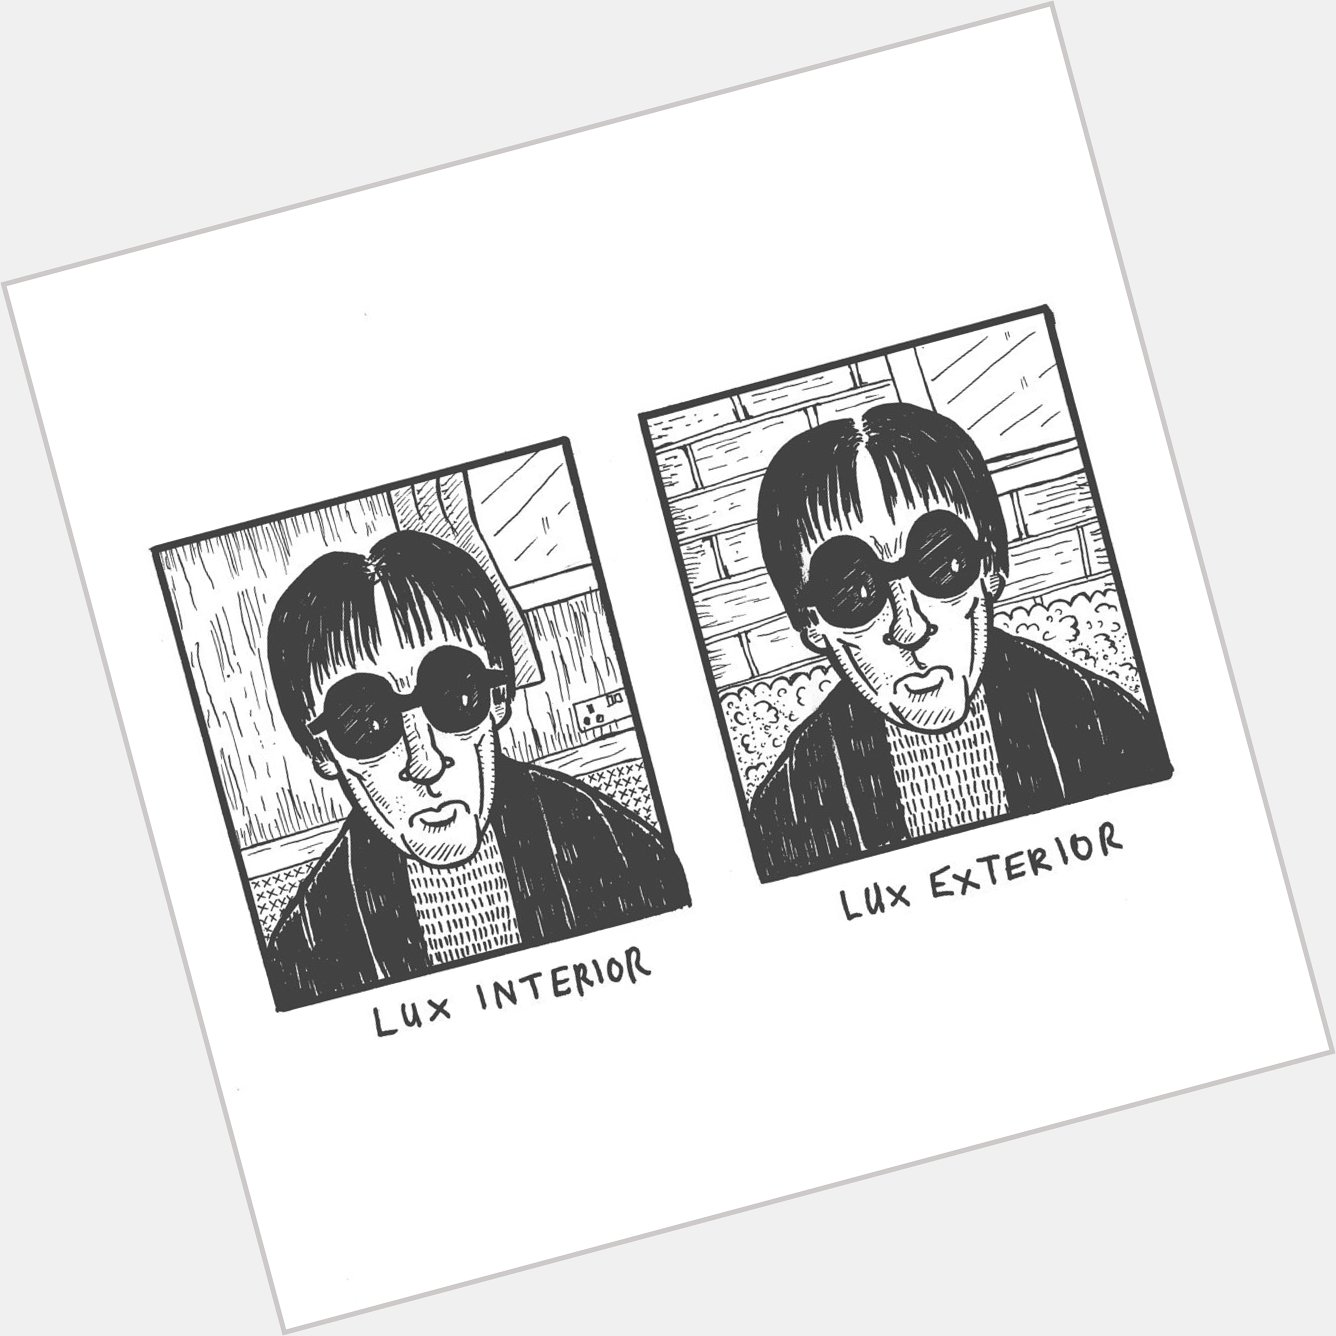 Made this silly comic. Happy birthday, Lux Interior 